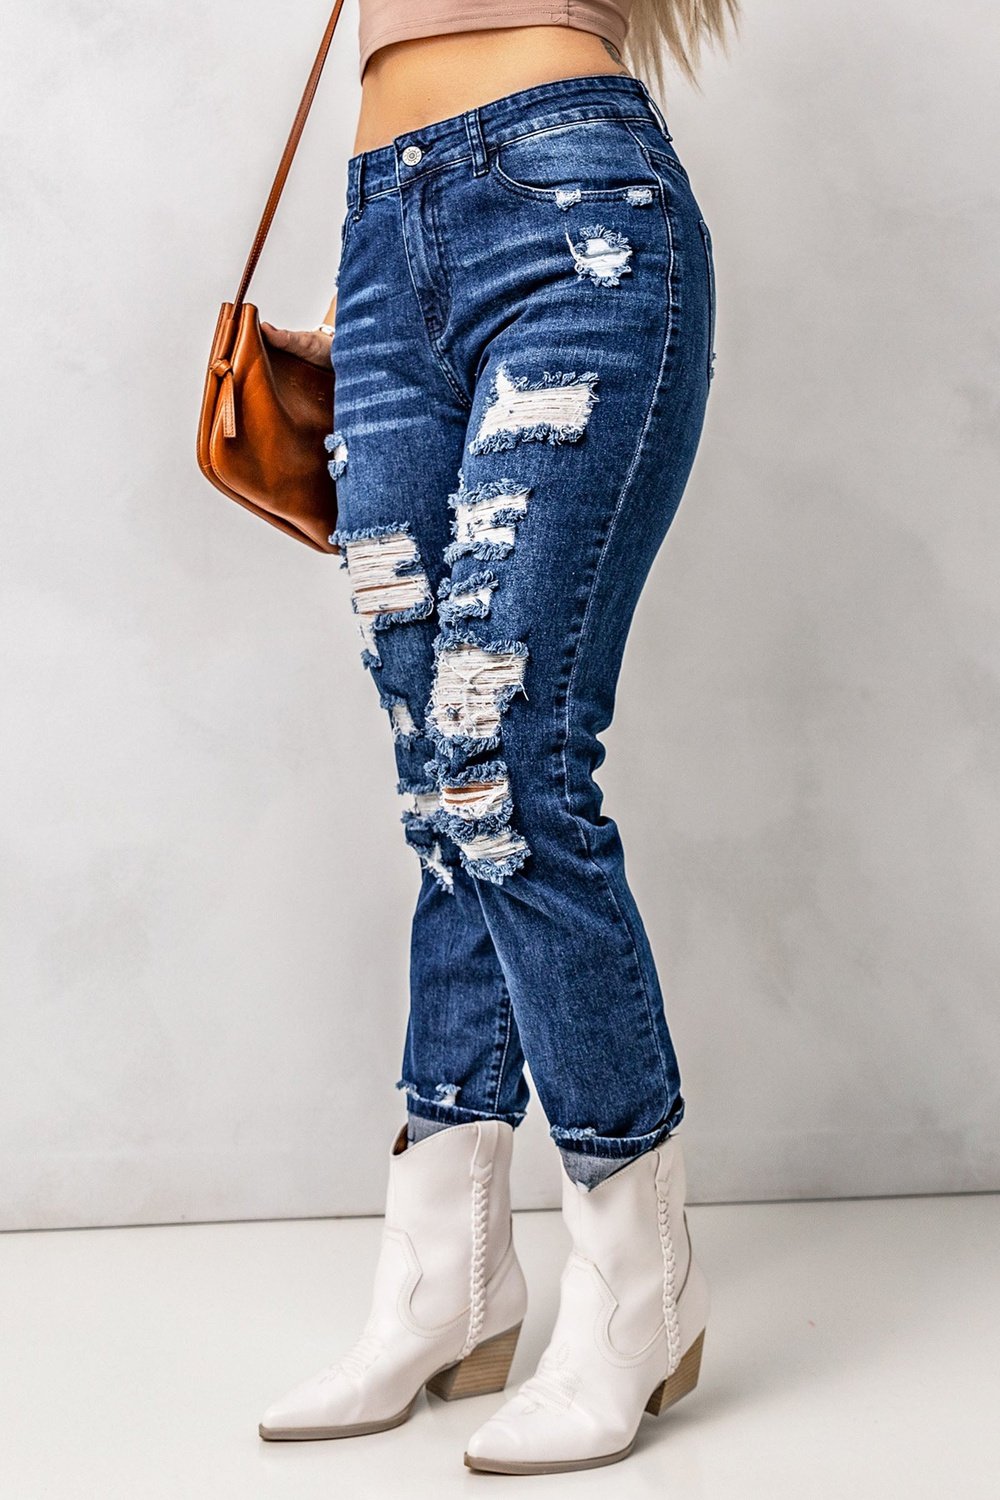 Distressed High Waist Jeans with Pockets - Jeans - FITGGINS